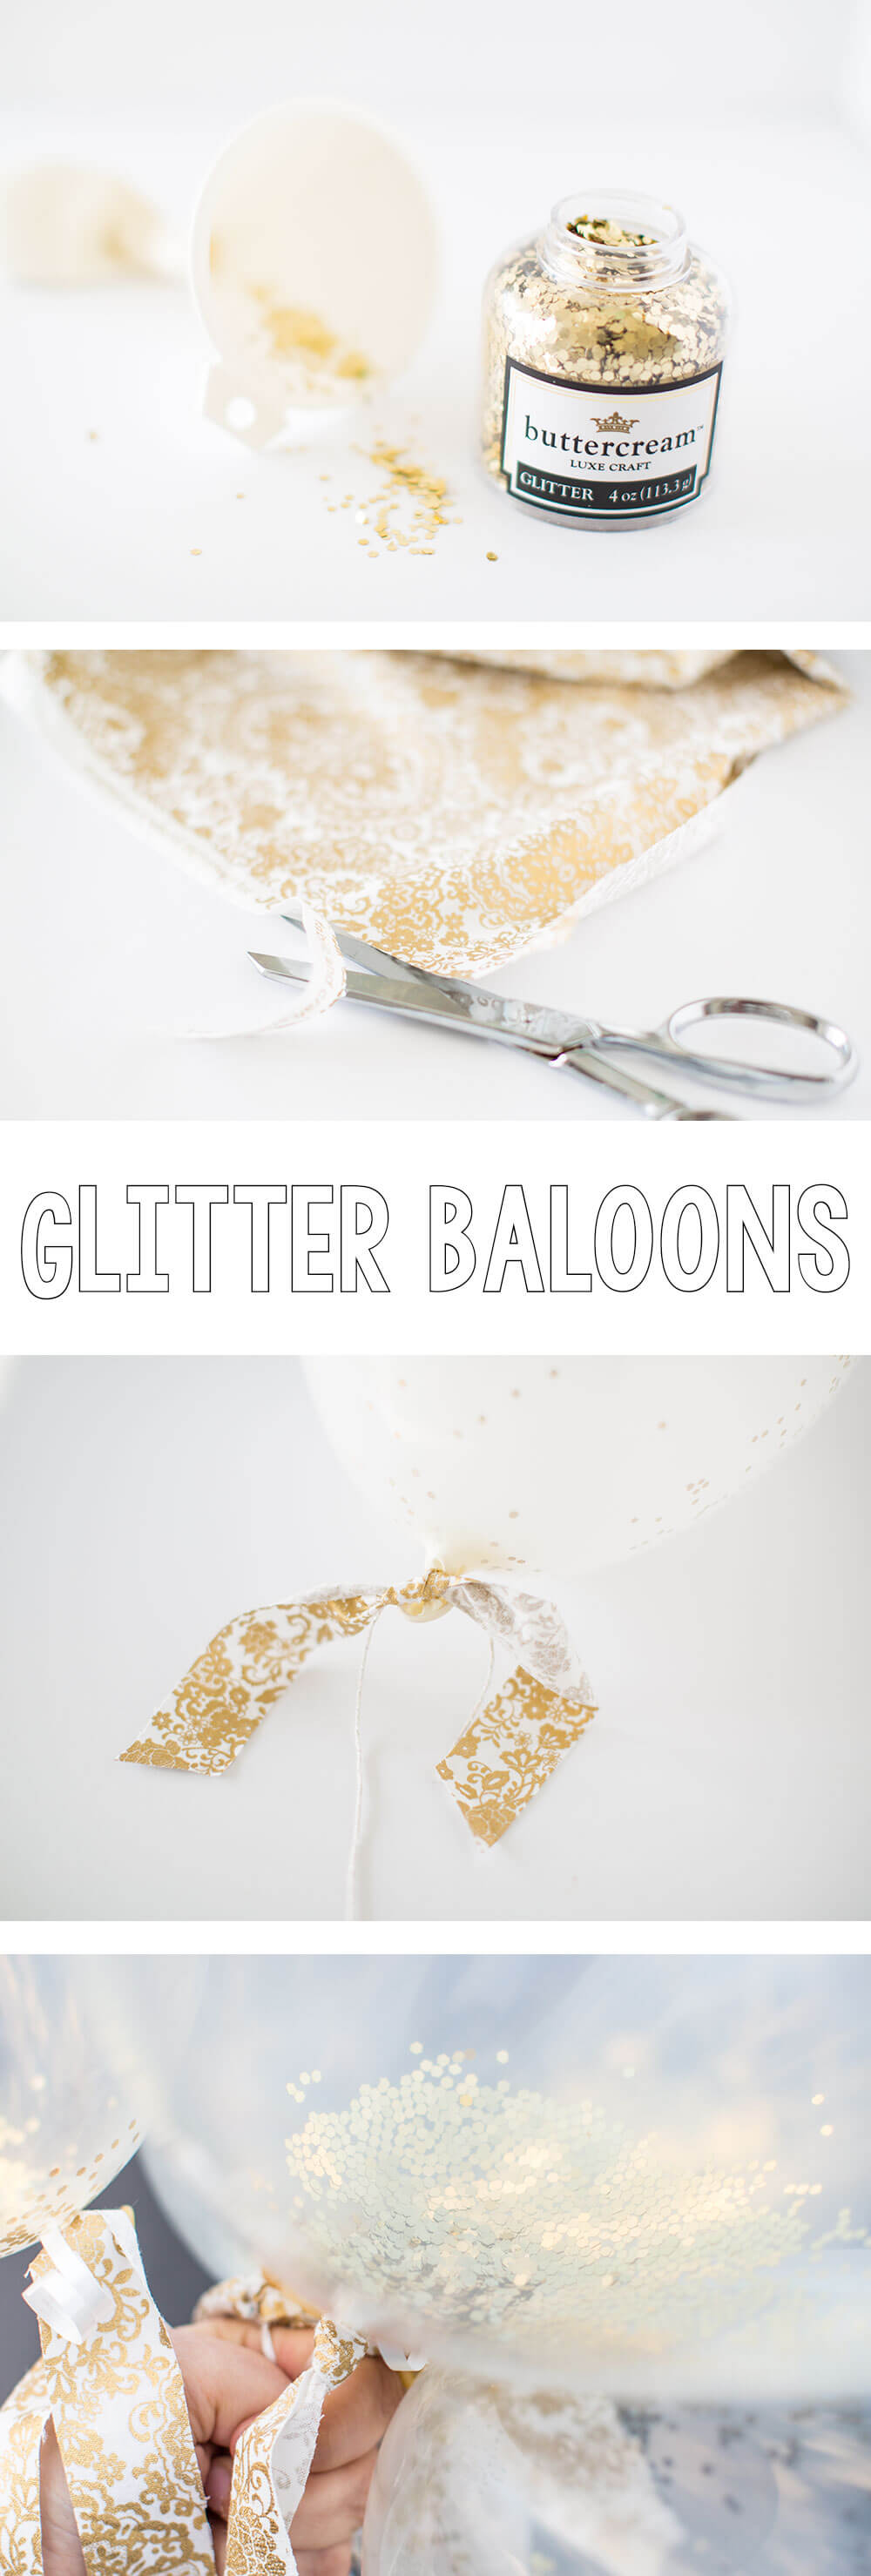 Glitter Balloons - last minute NYE idea! A simple way to add a big impact at your party! Bring some sparkle to any party by adding glitter and fabric scraps to your clear balloons!